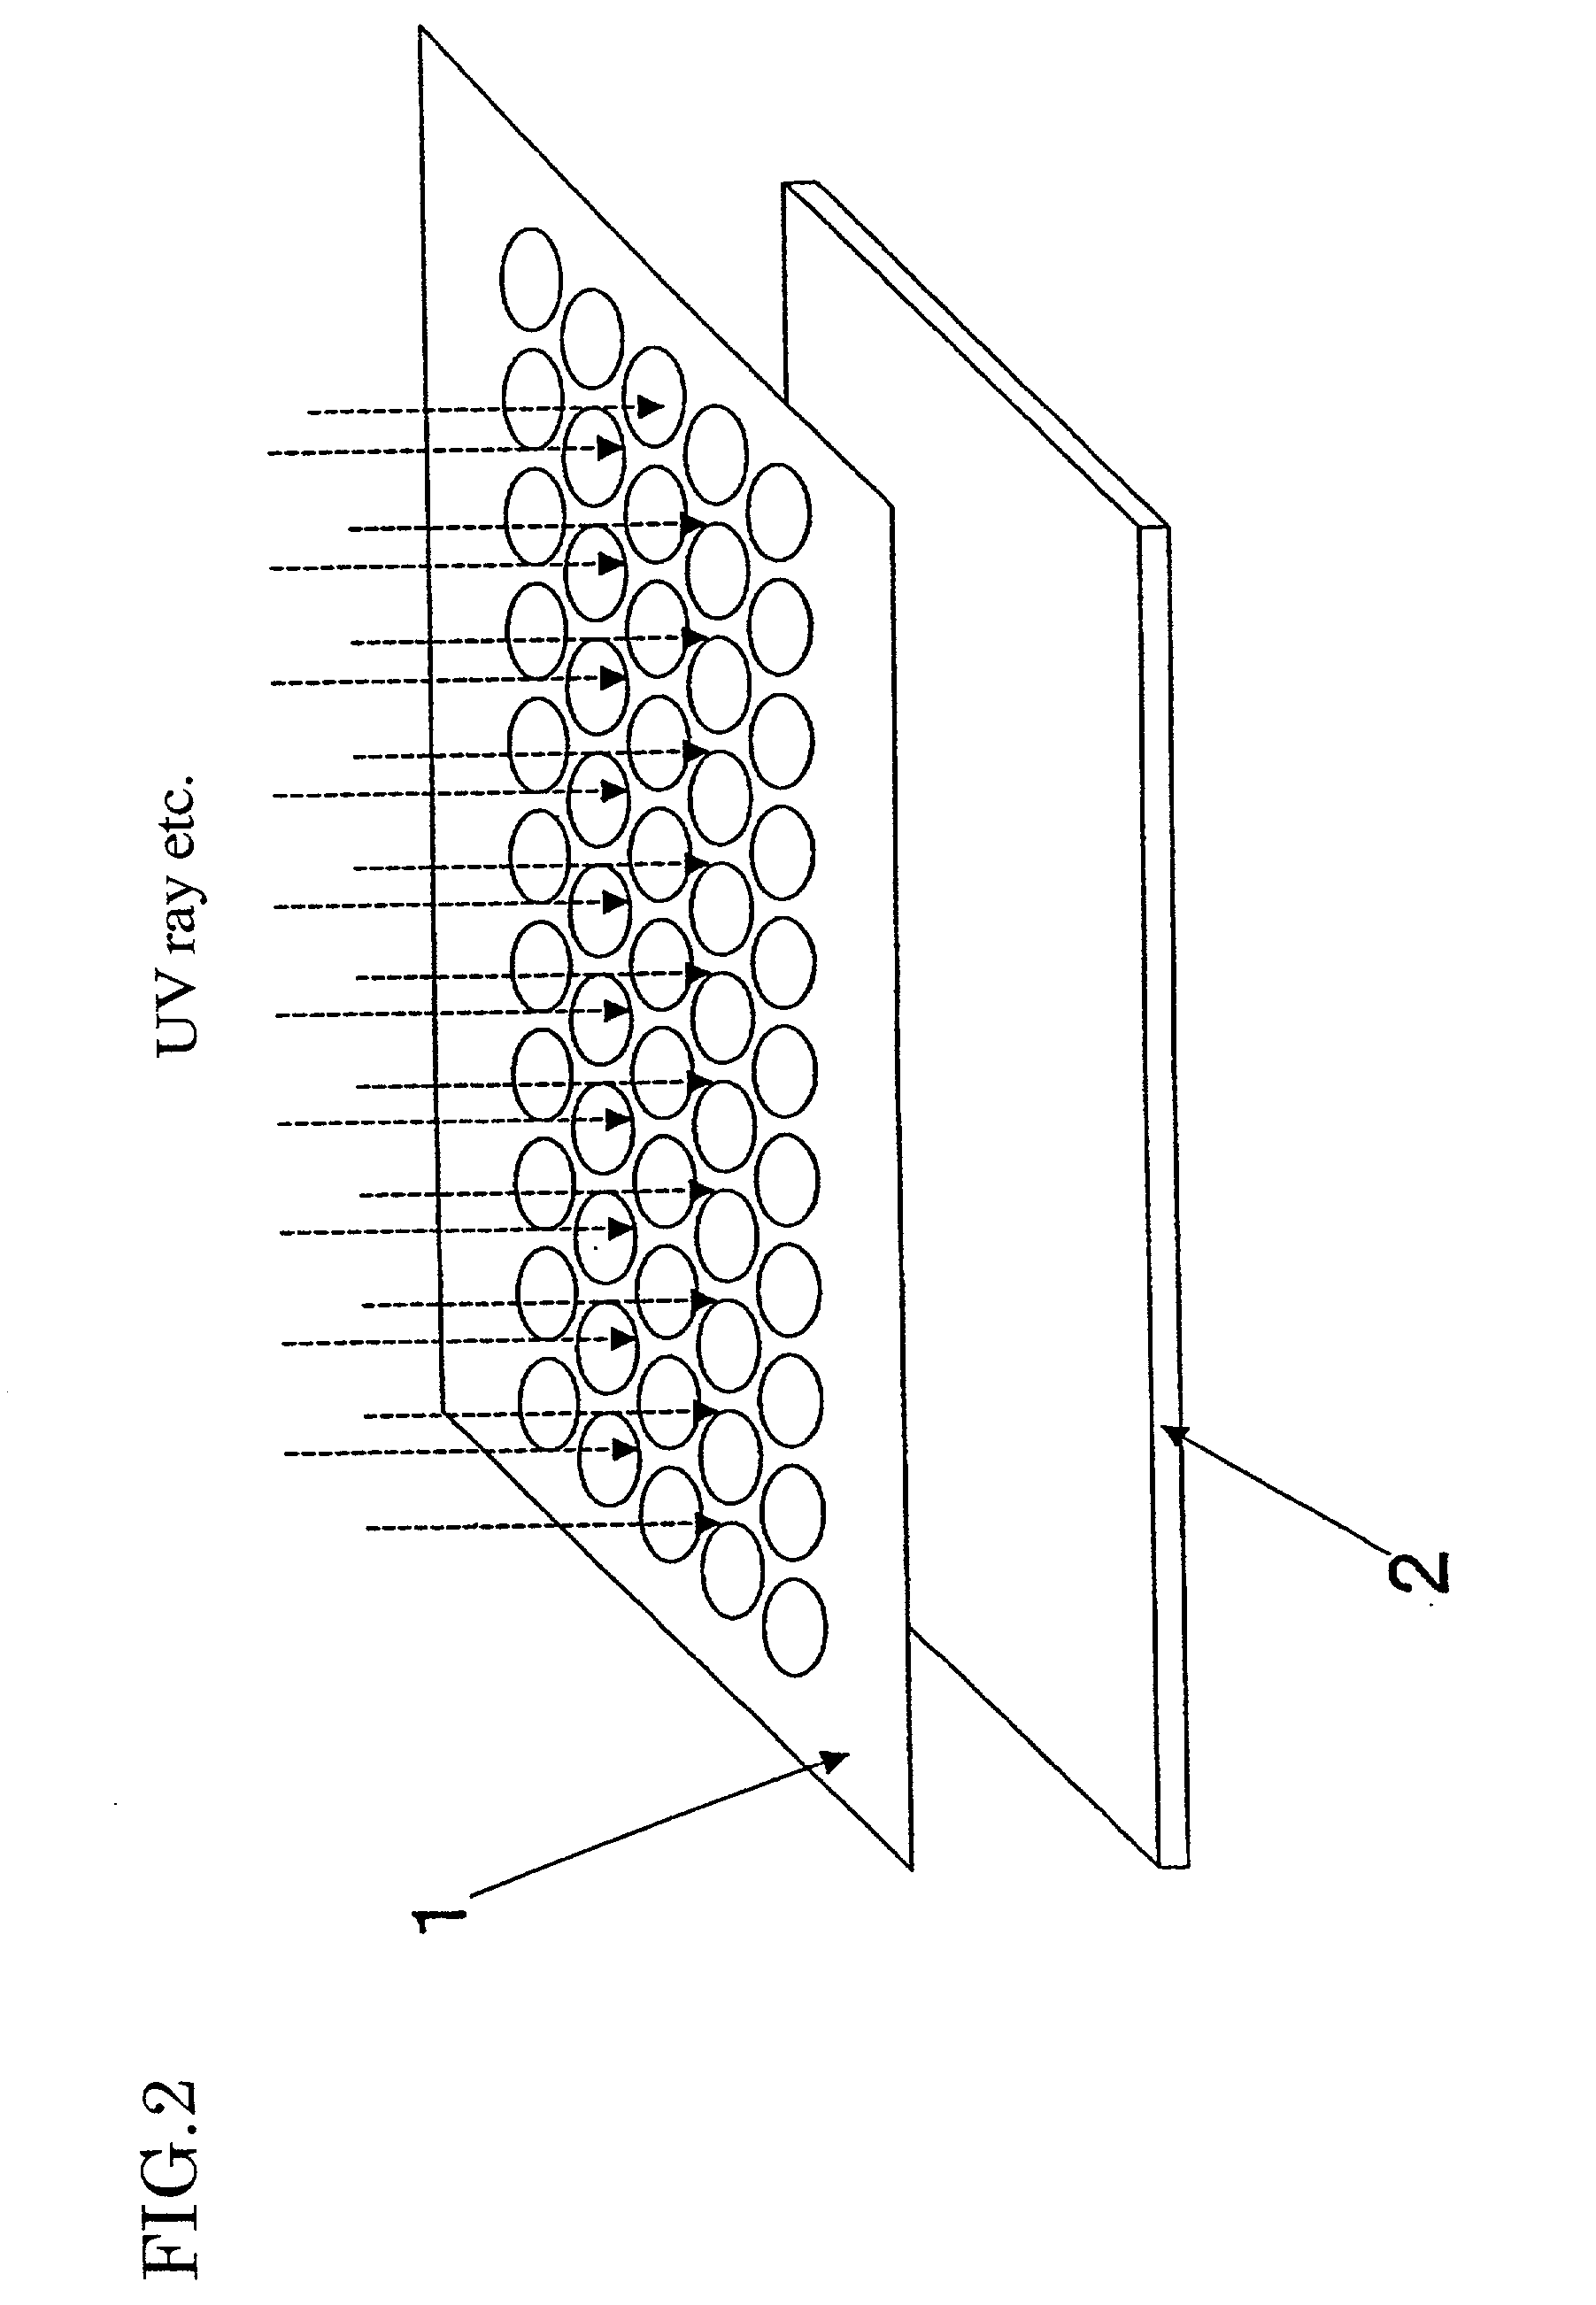 Microarray and microarray substrate